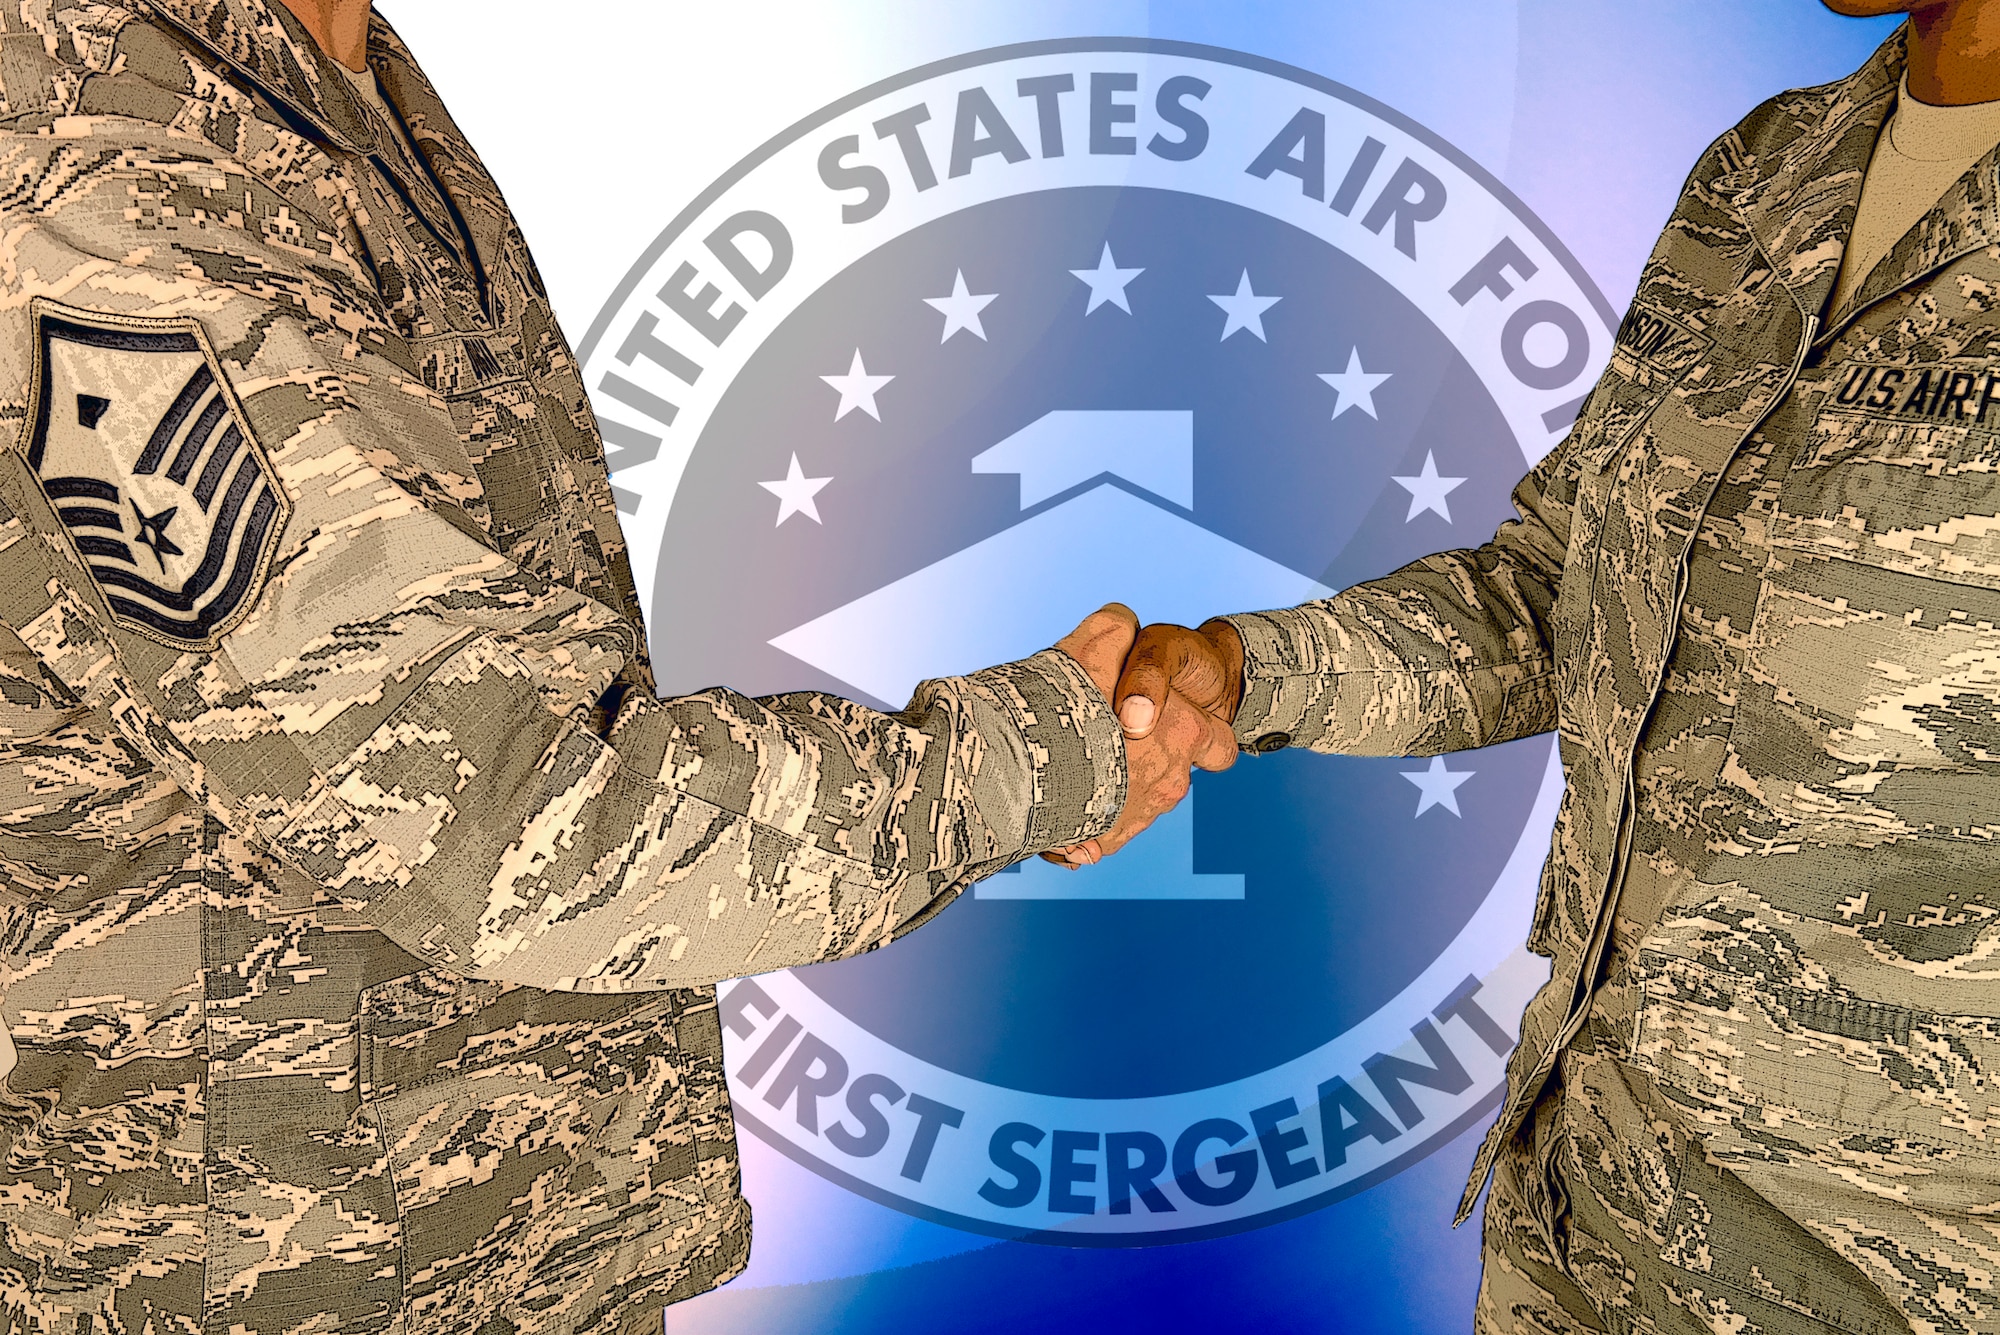 The First Sergeant Council consists of all first sergeants, their additional duty first sergeants and assistants on an Air Force installation. The council assists commanders in the morale and welfare of Airmen and their families. (U.S. Air Force graphic by Heide Couch)